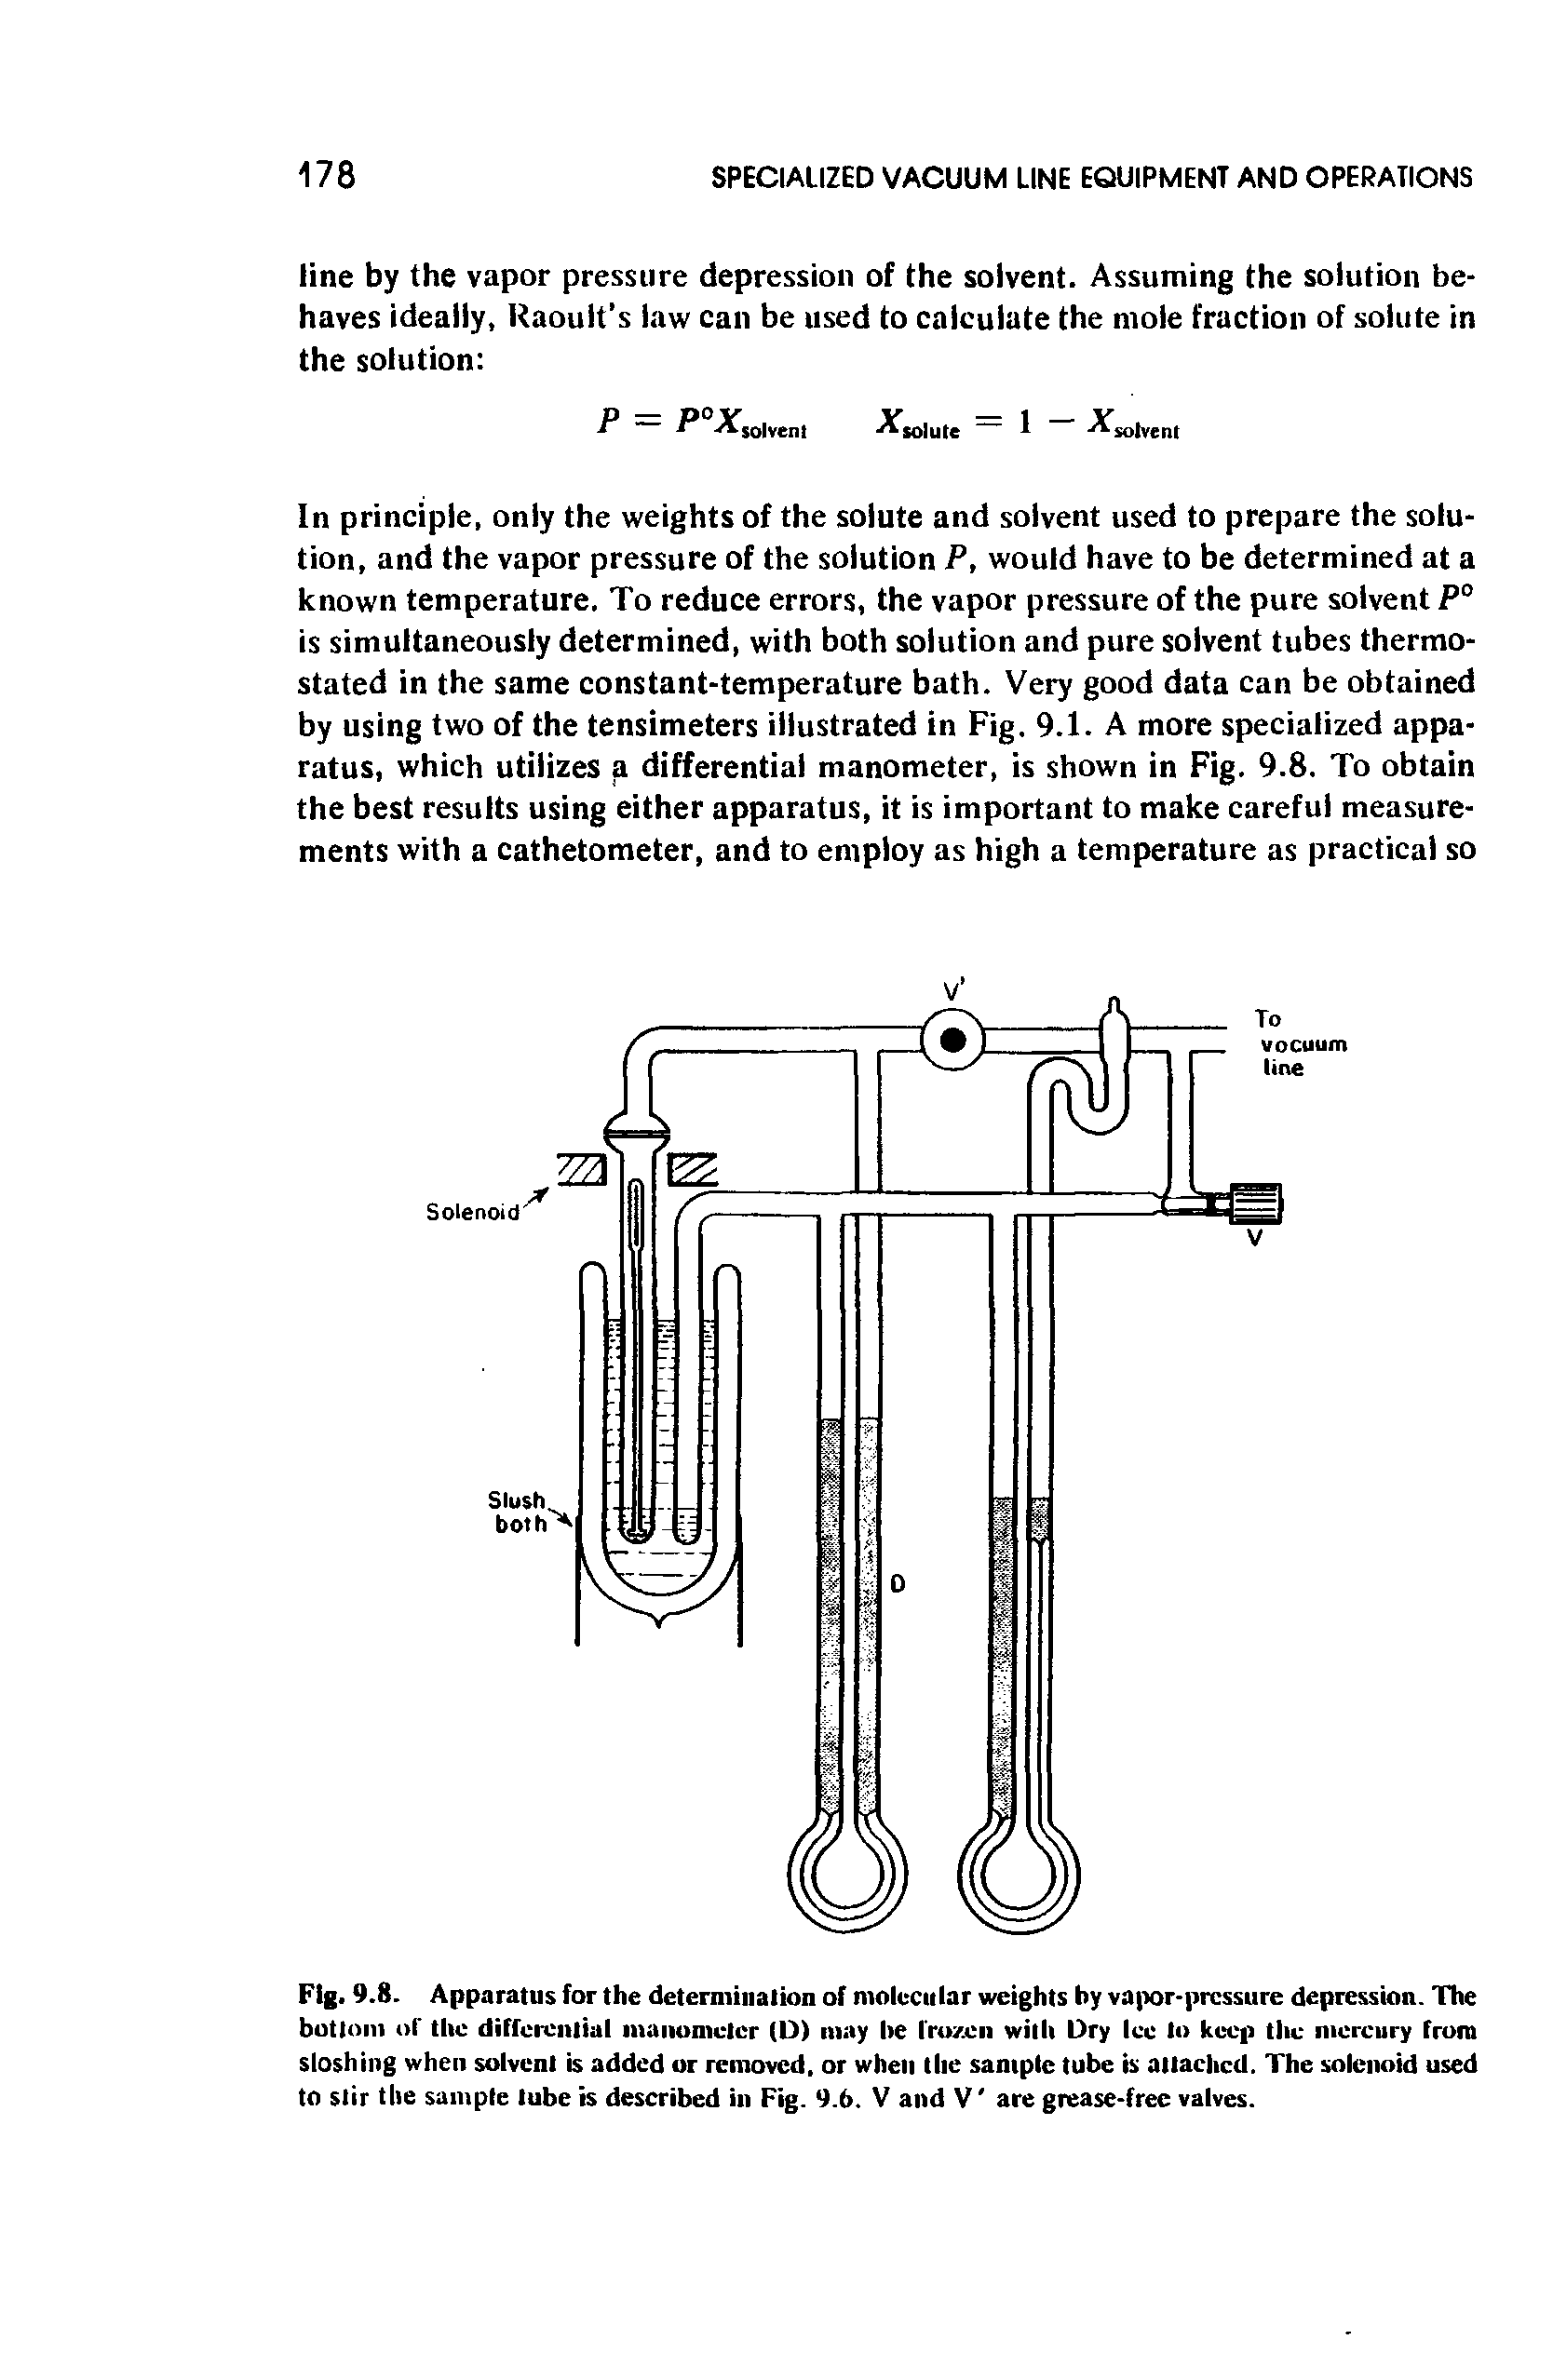 Fig. 9.8. Apparatus for the determination of molecular weights by vapor-pressure depression. The bottom of the differential manometer (D) may he frozen with Dry Ice to keep the mercury from sloshing when solvent is added or removed, or when the sample tube is attached. The solenoid used to stir the sample tube is described in Fig. 9.6. V and V are grease-free valves.